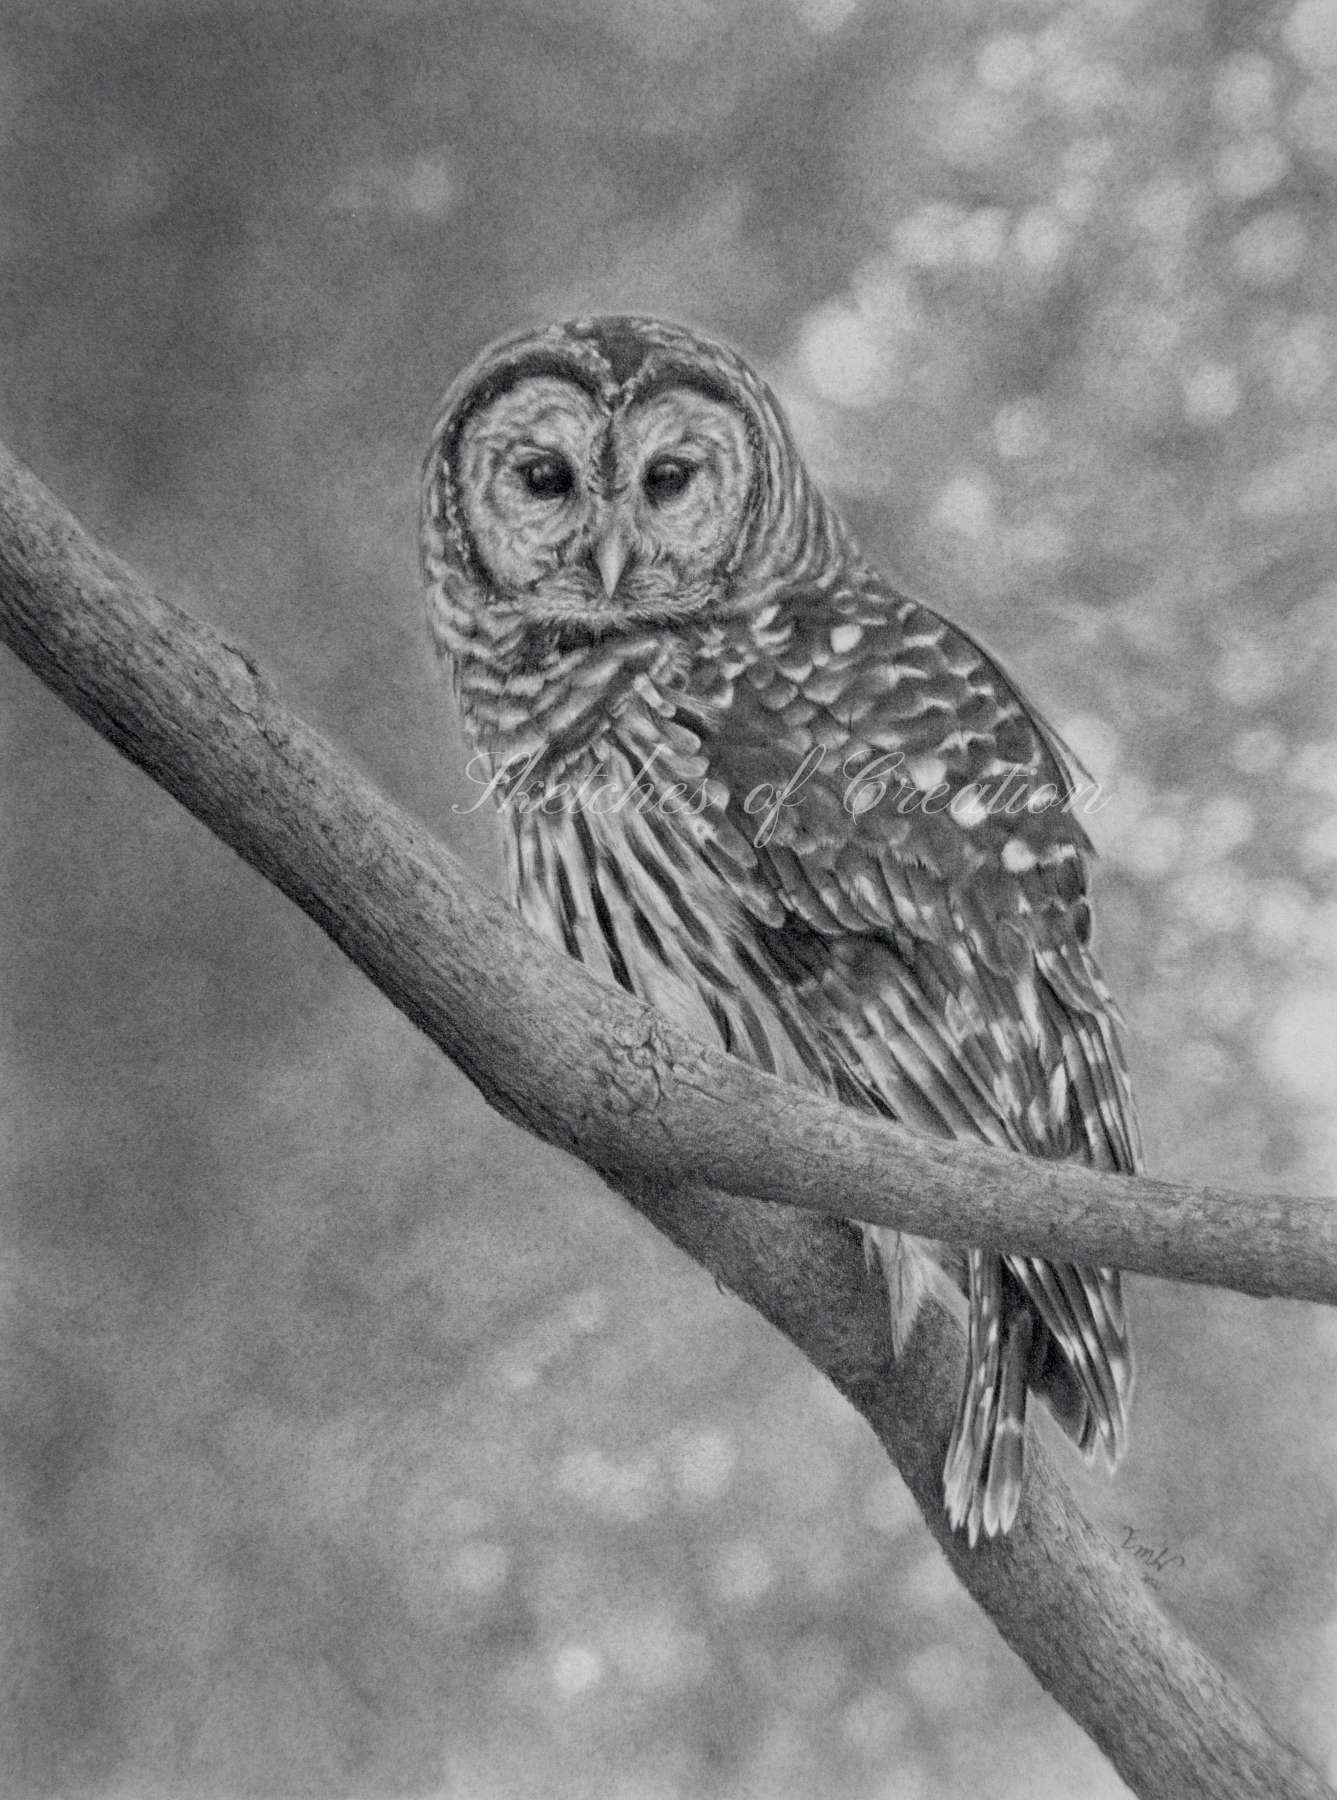 'Barred Owl' a drawing of a Barred Owl on a branch. approximately 9x12 inches plus deckled edge. Completed March 2021